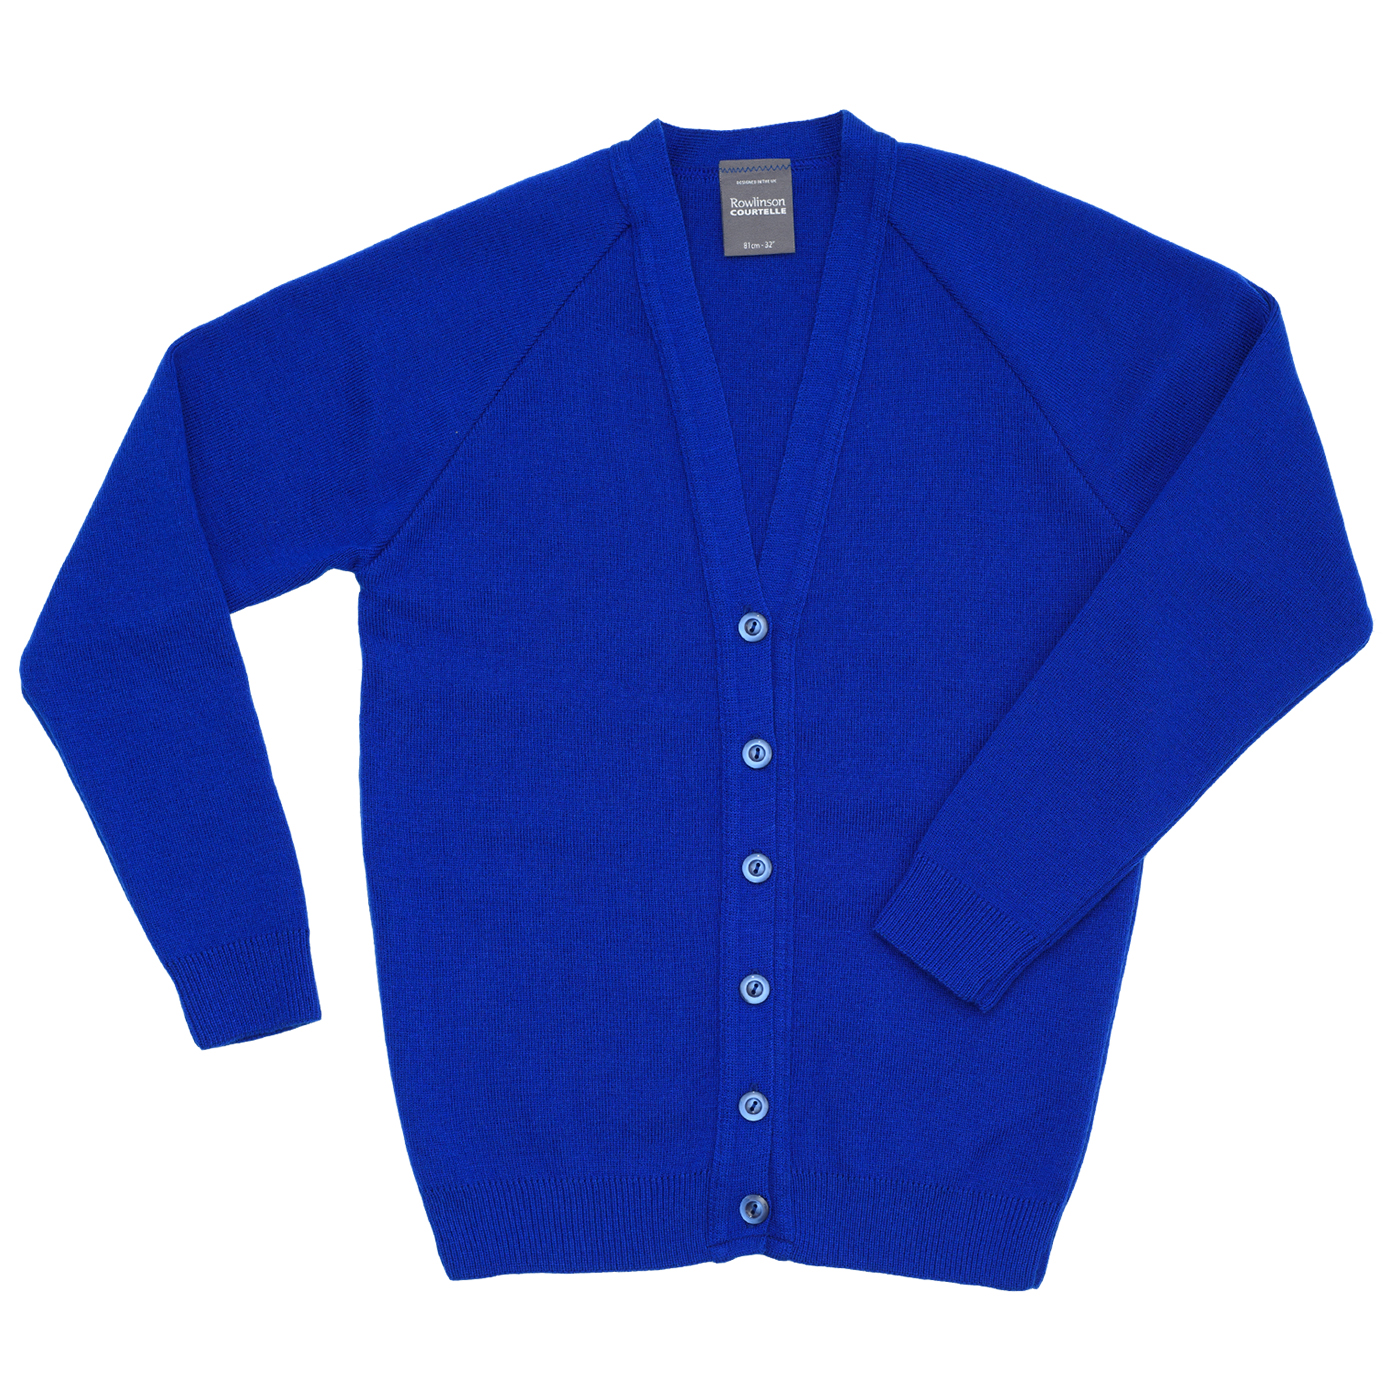 Children's knitted cardigan - Royal Blue